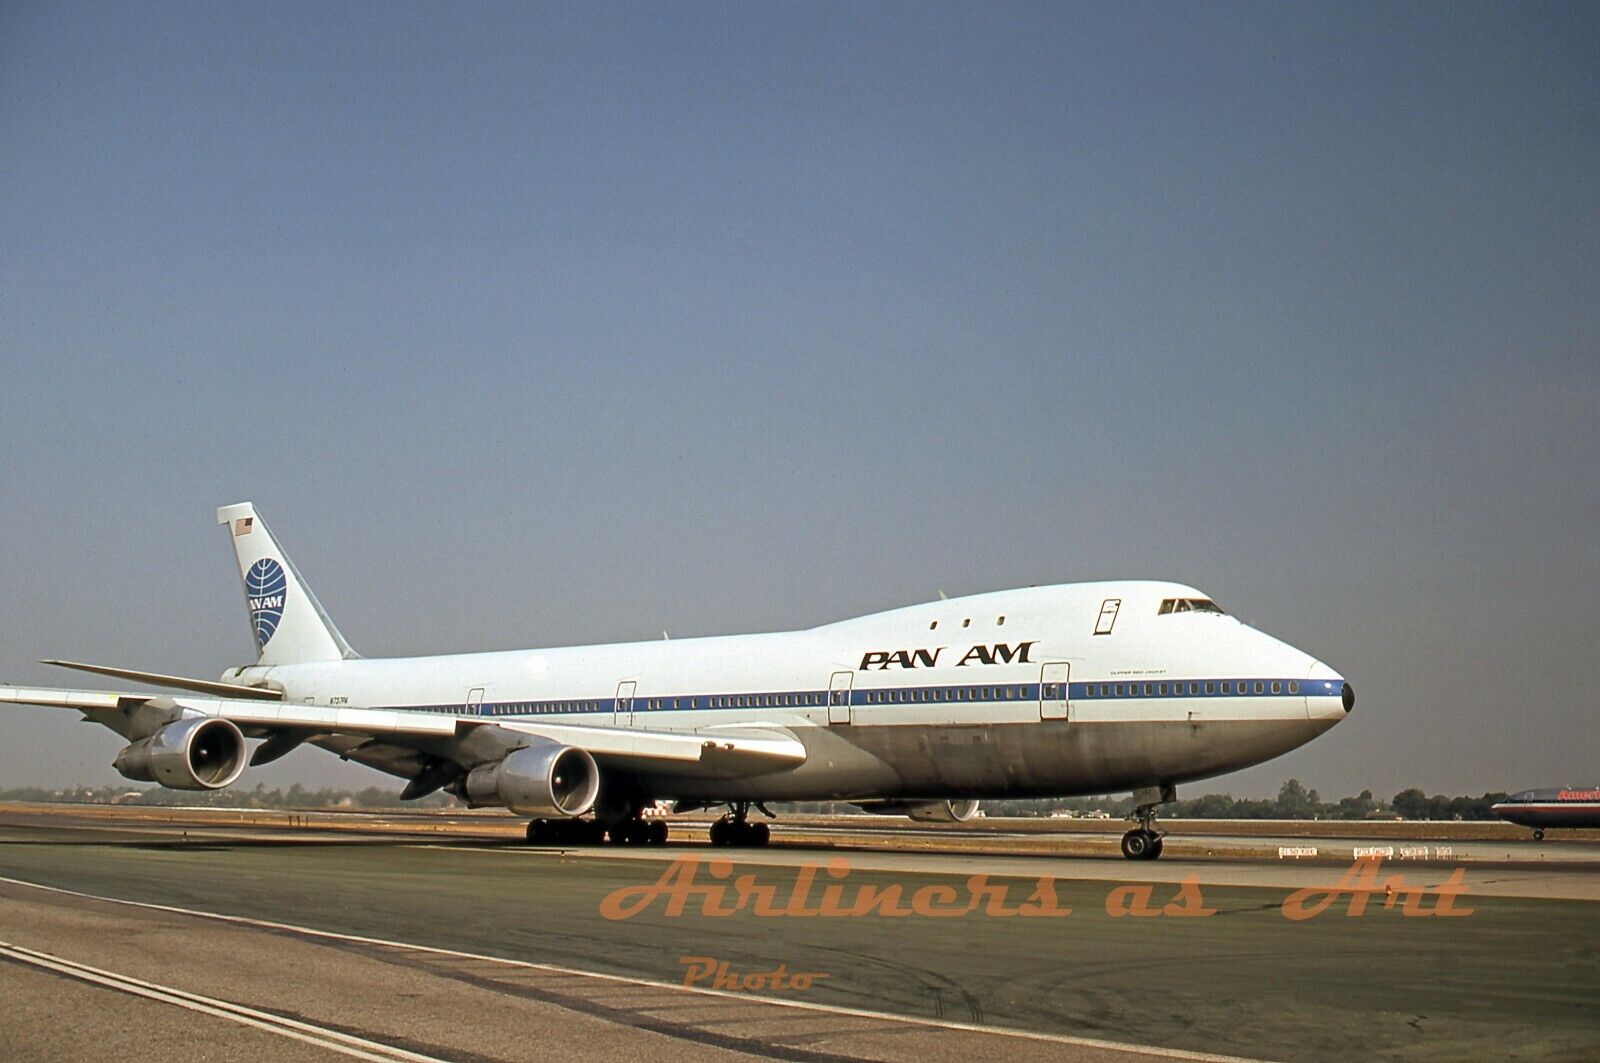 Pan Am Boeing 747-121 N737PA at LAX in August 1975 8\